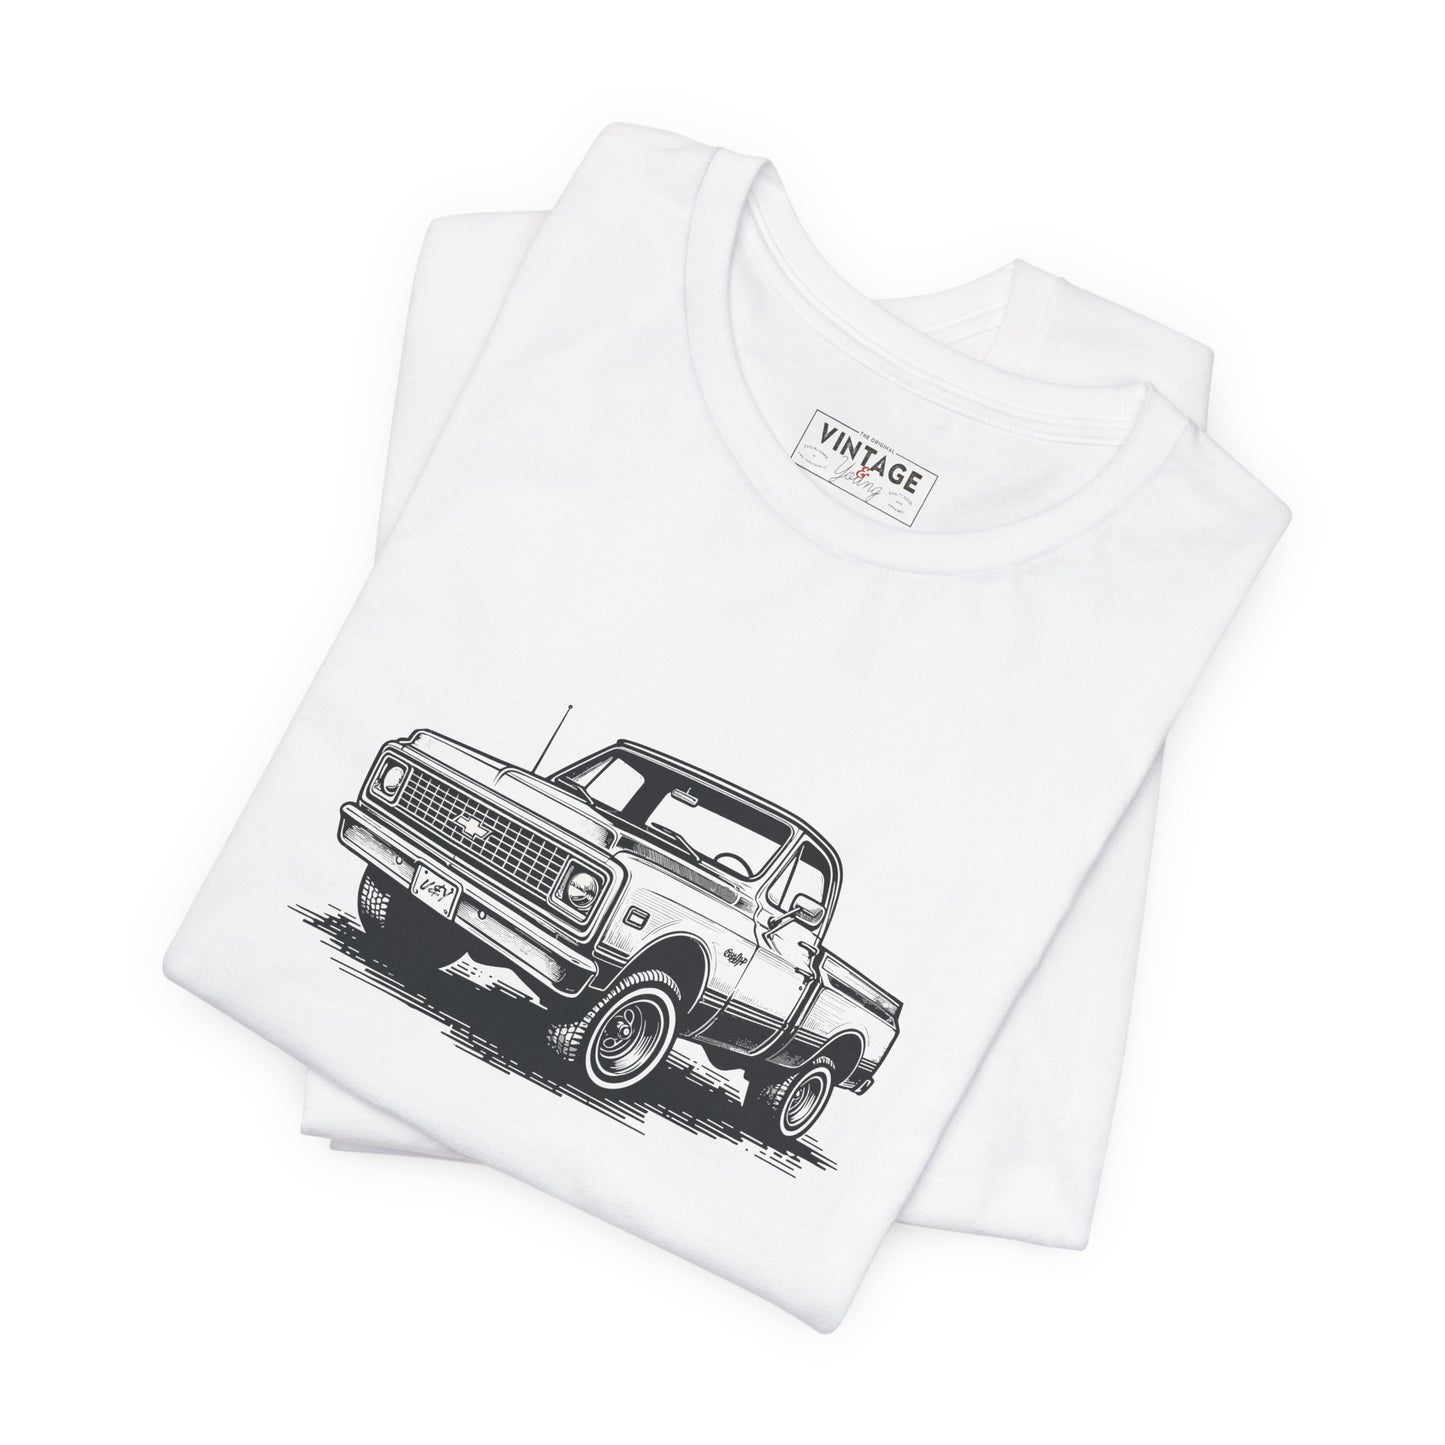 Vintage Square Body Pickup Truck 4x4 Hand-Drawn Style T-Shirt